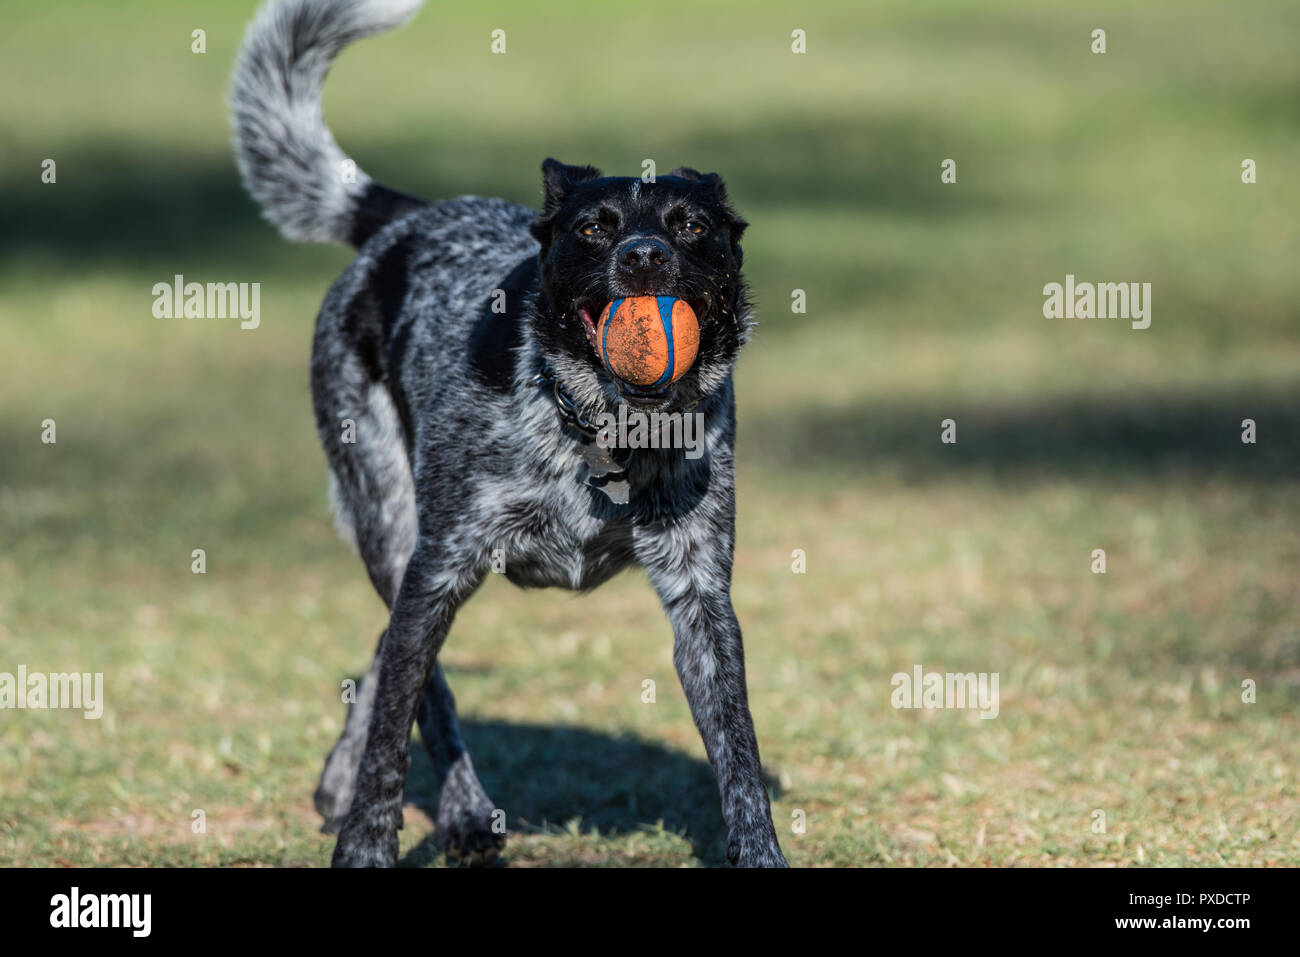 Playful Australian Shepard Heeler mixed breed dog has firm grasp in mouth as he brings the ball back across the park grass. Stock Photo